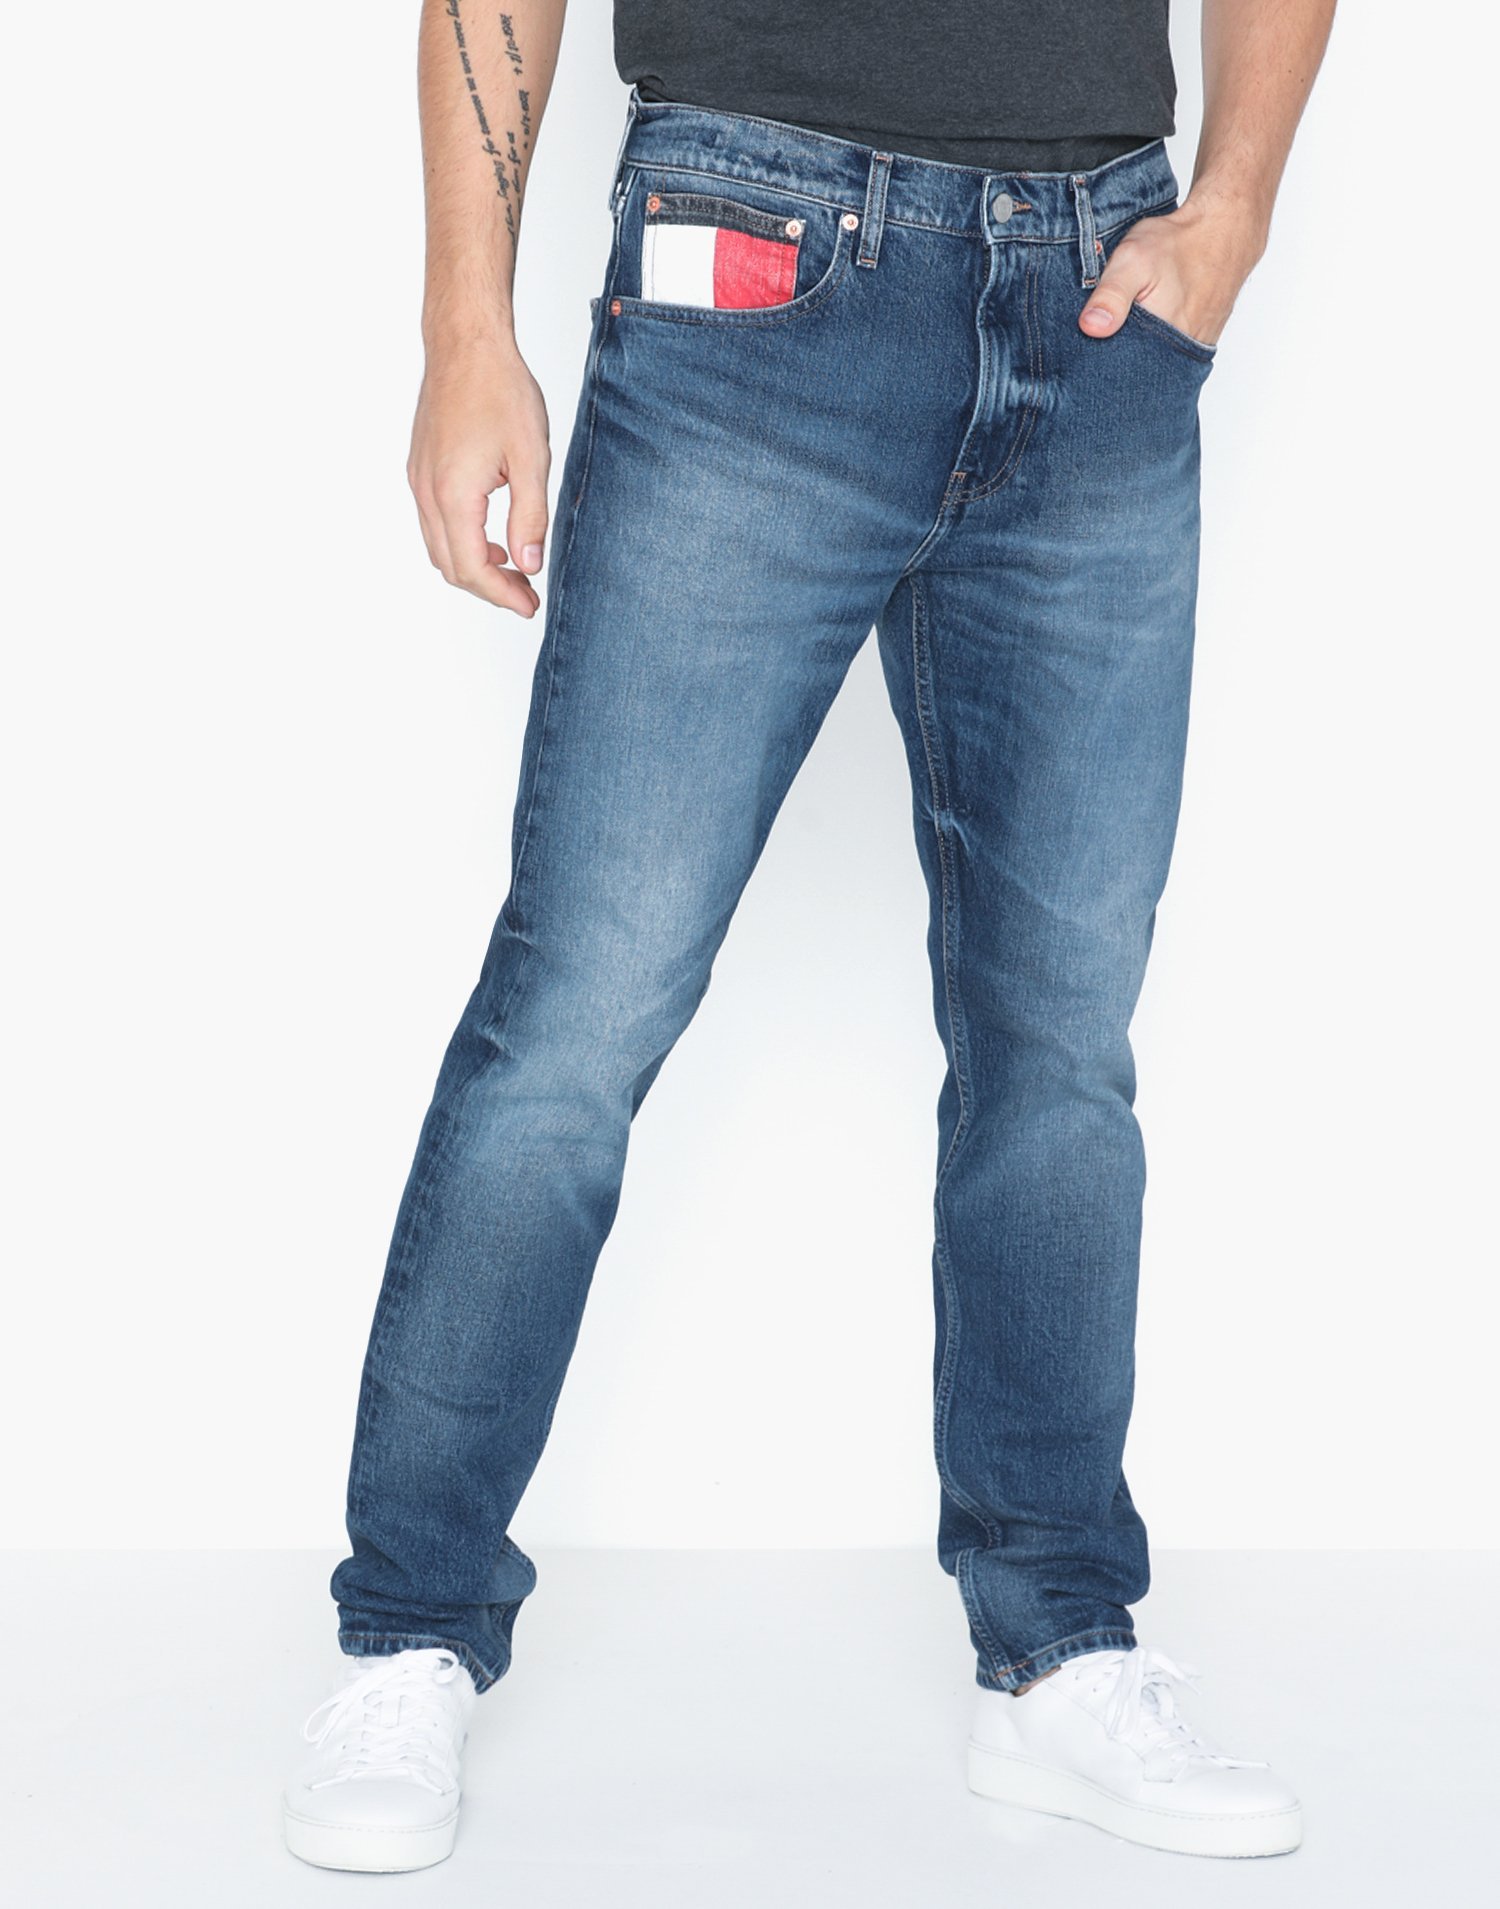 tj 1988 tapered fit jeans